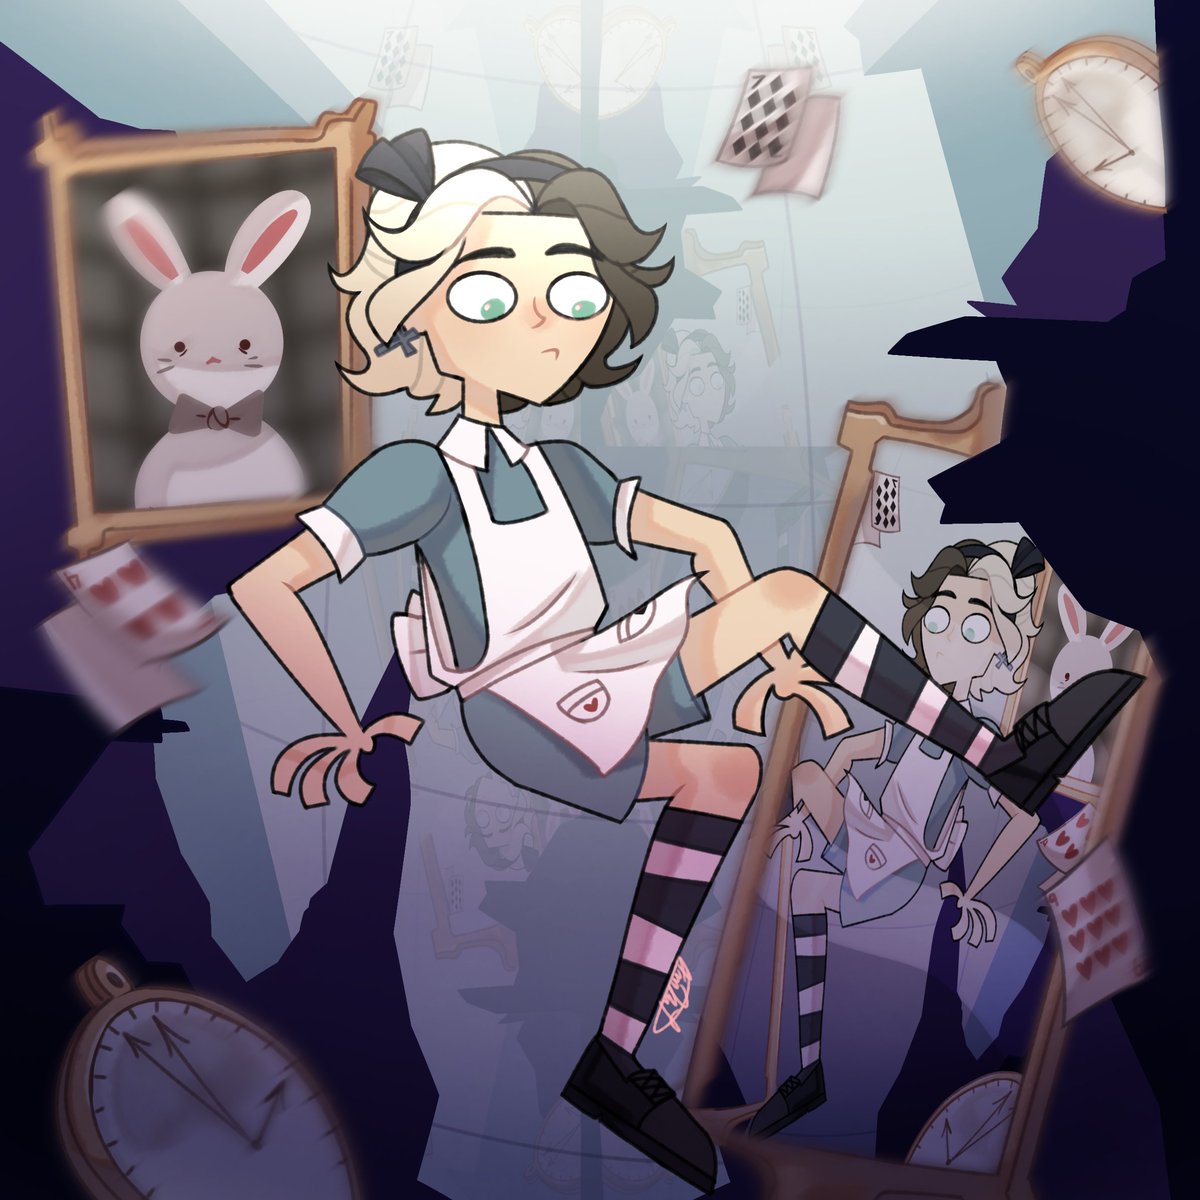 Aiden in Wonderland?! This AU already existed, but I decided to make some changes in the design (to make it more original)
#campamentodesventura #disventurecamp #disventurecampallstars #aliceinwonderland